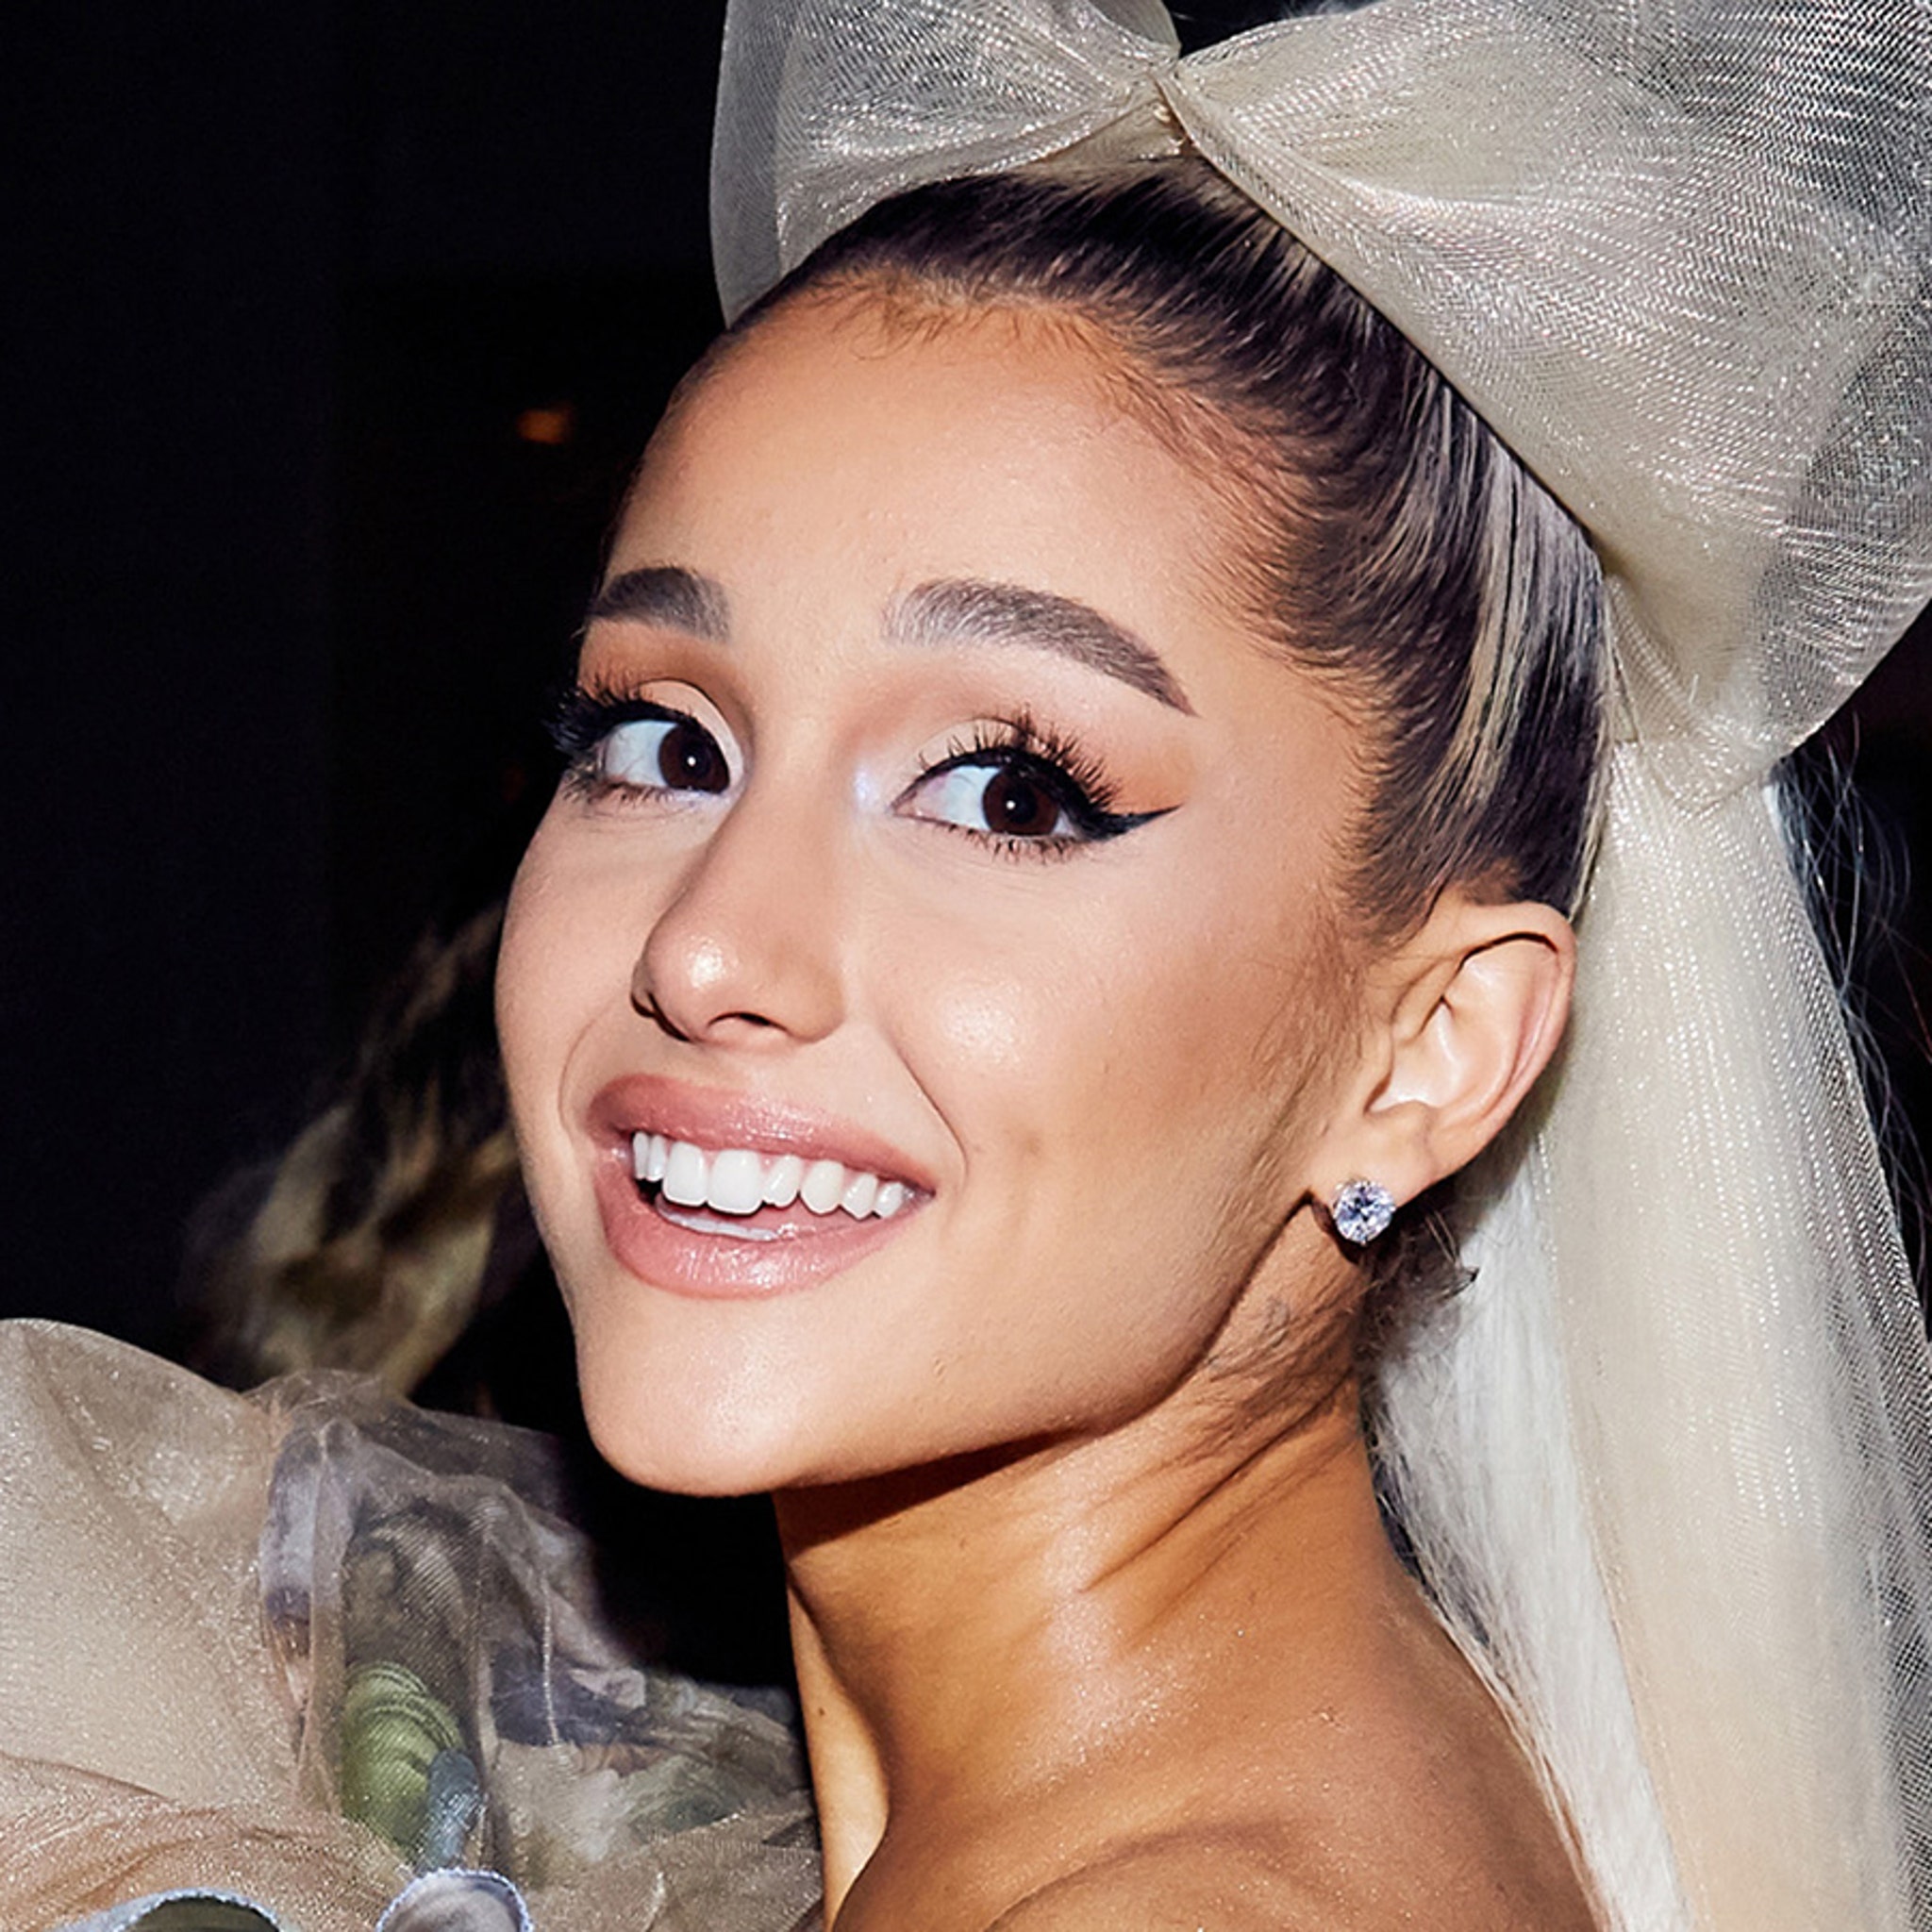 Ariana Grande tells fans to use clear bags as she ups security for